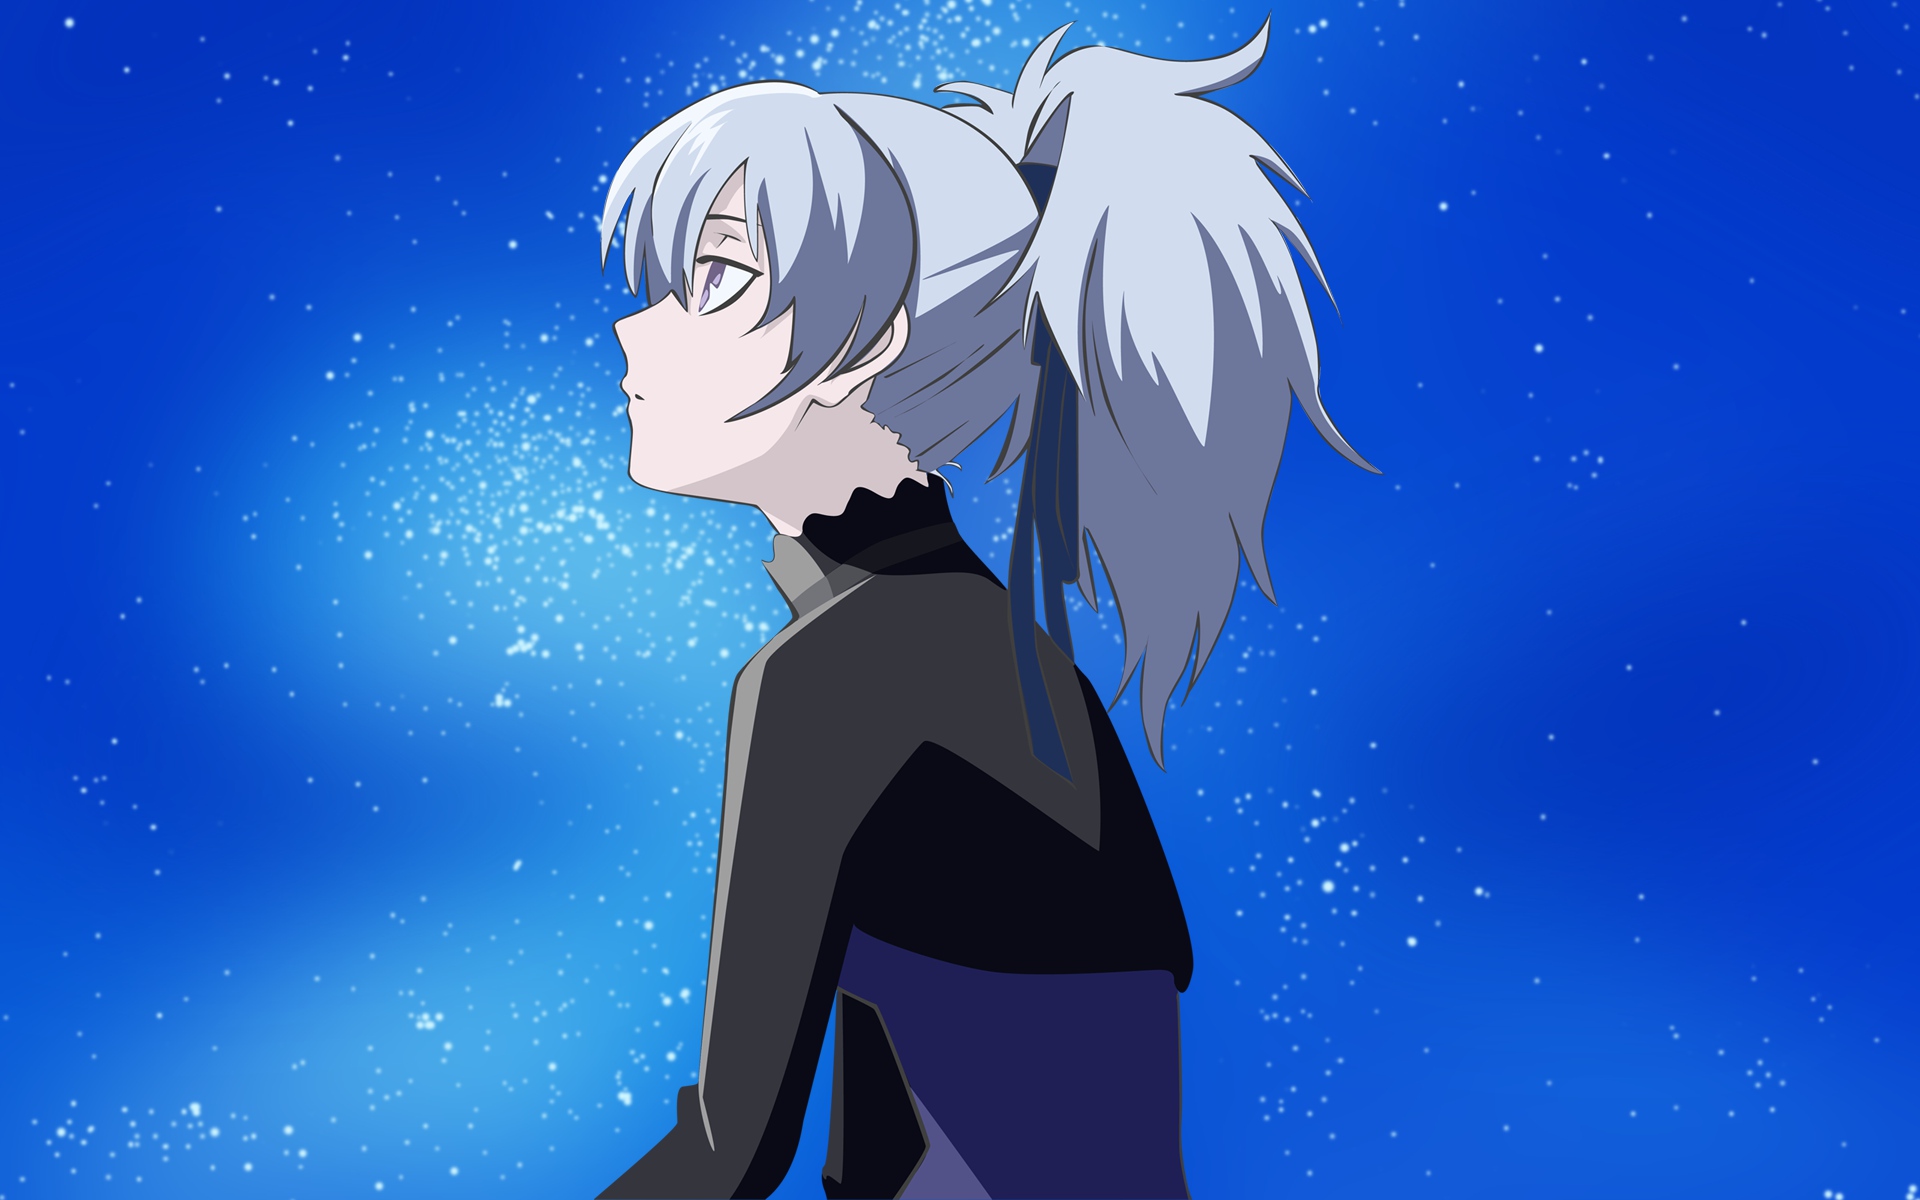 Yin, a character from Darker Than Black anime series, with a serene expression in a cool background.